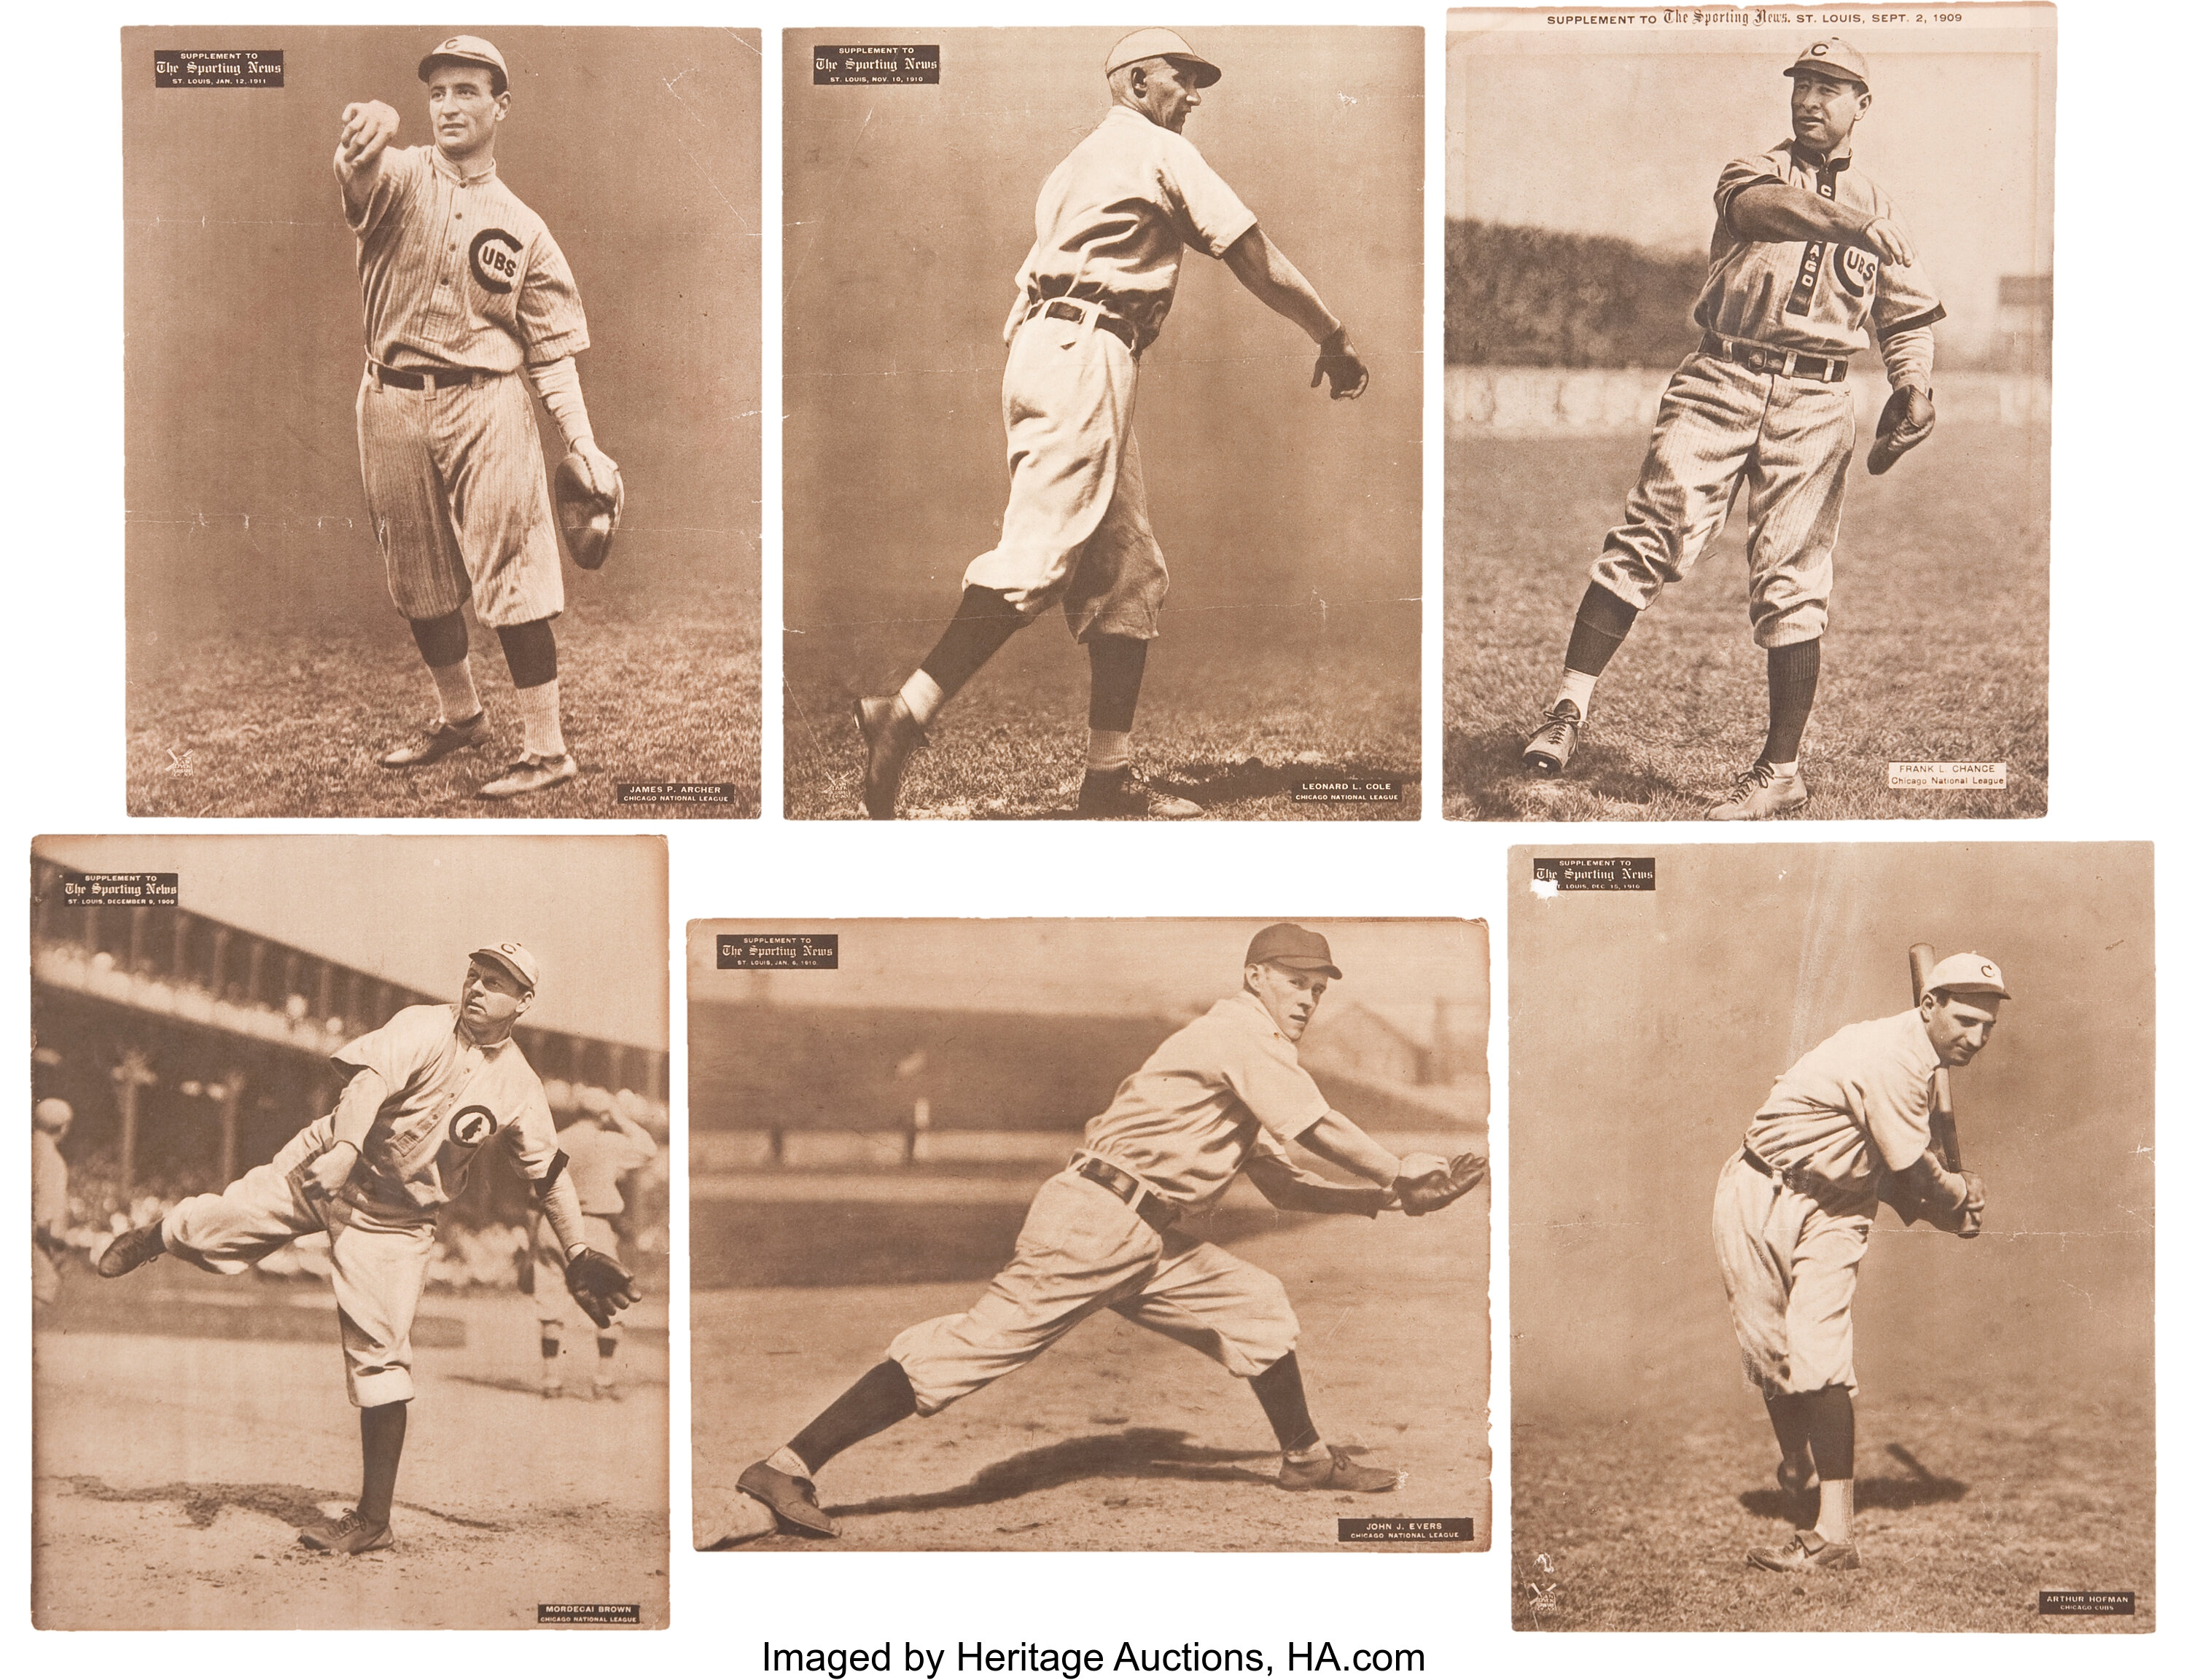 1910 Chicago Cubs by The Sporting News